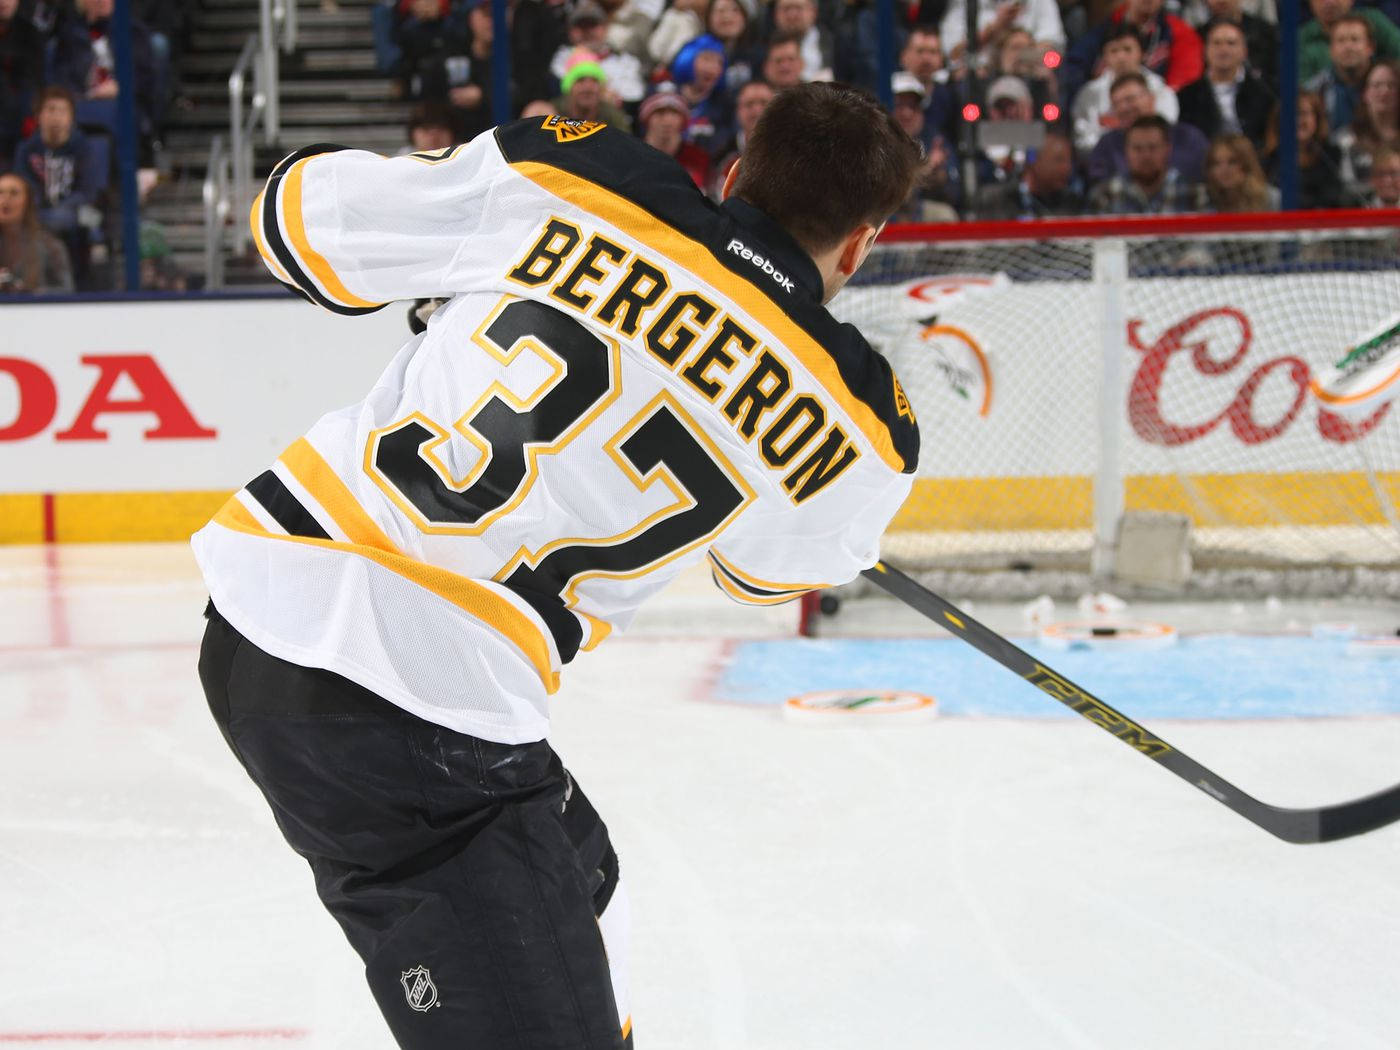 Patrice Bergeron In Action During A Hockey Game Background